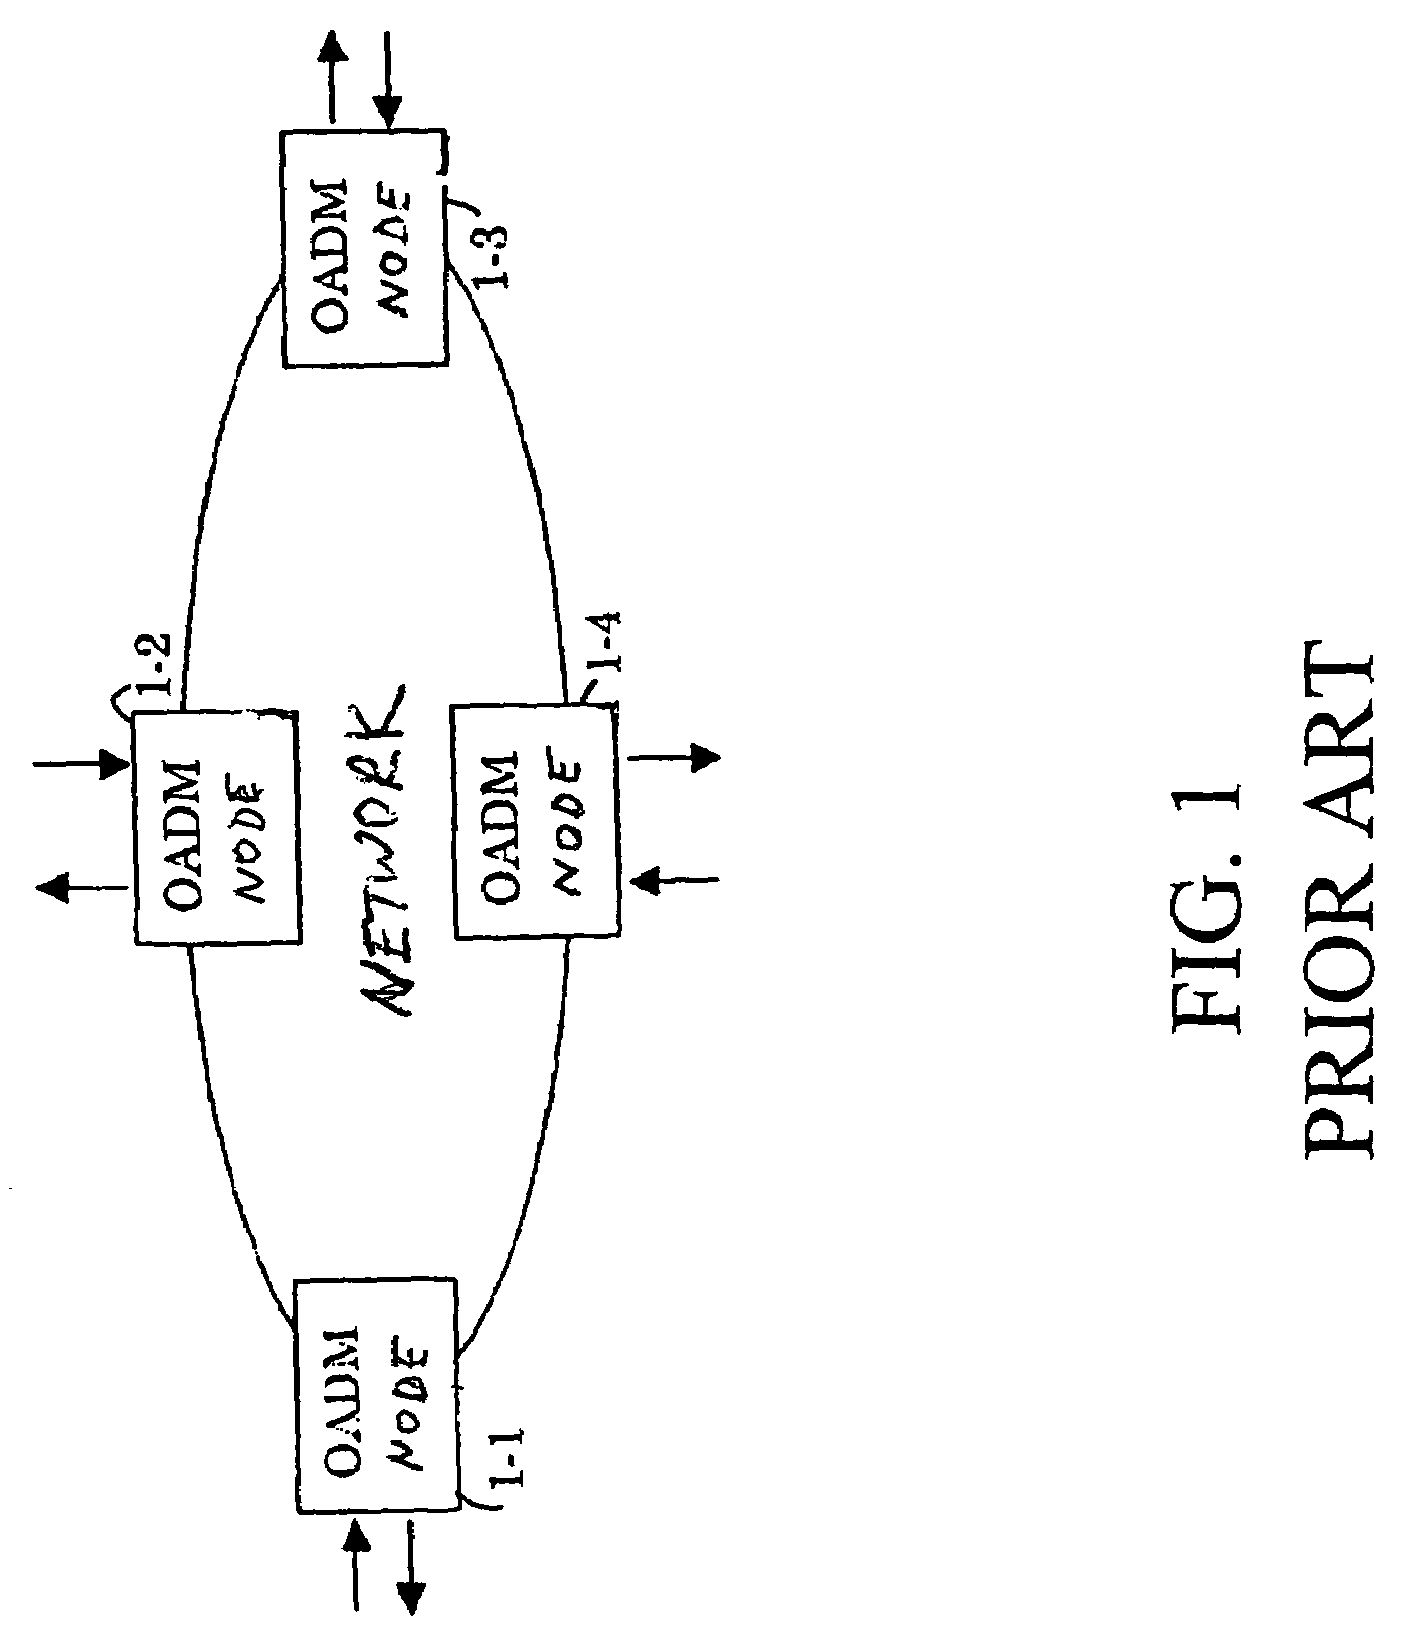 Optical repeater converting wavelength and bit rate between networks